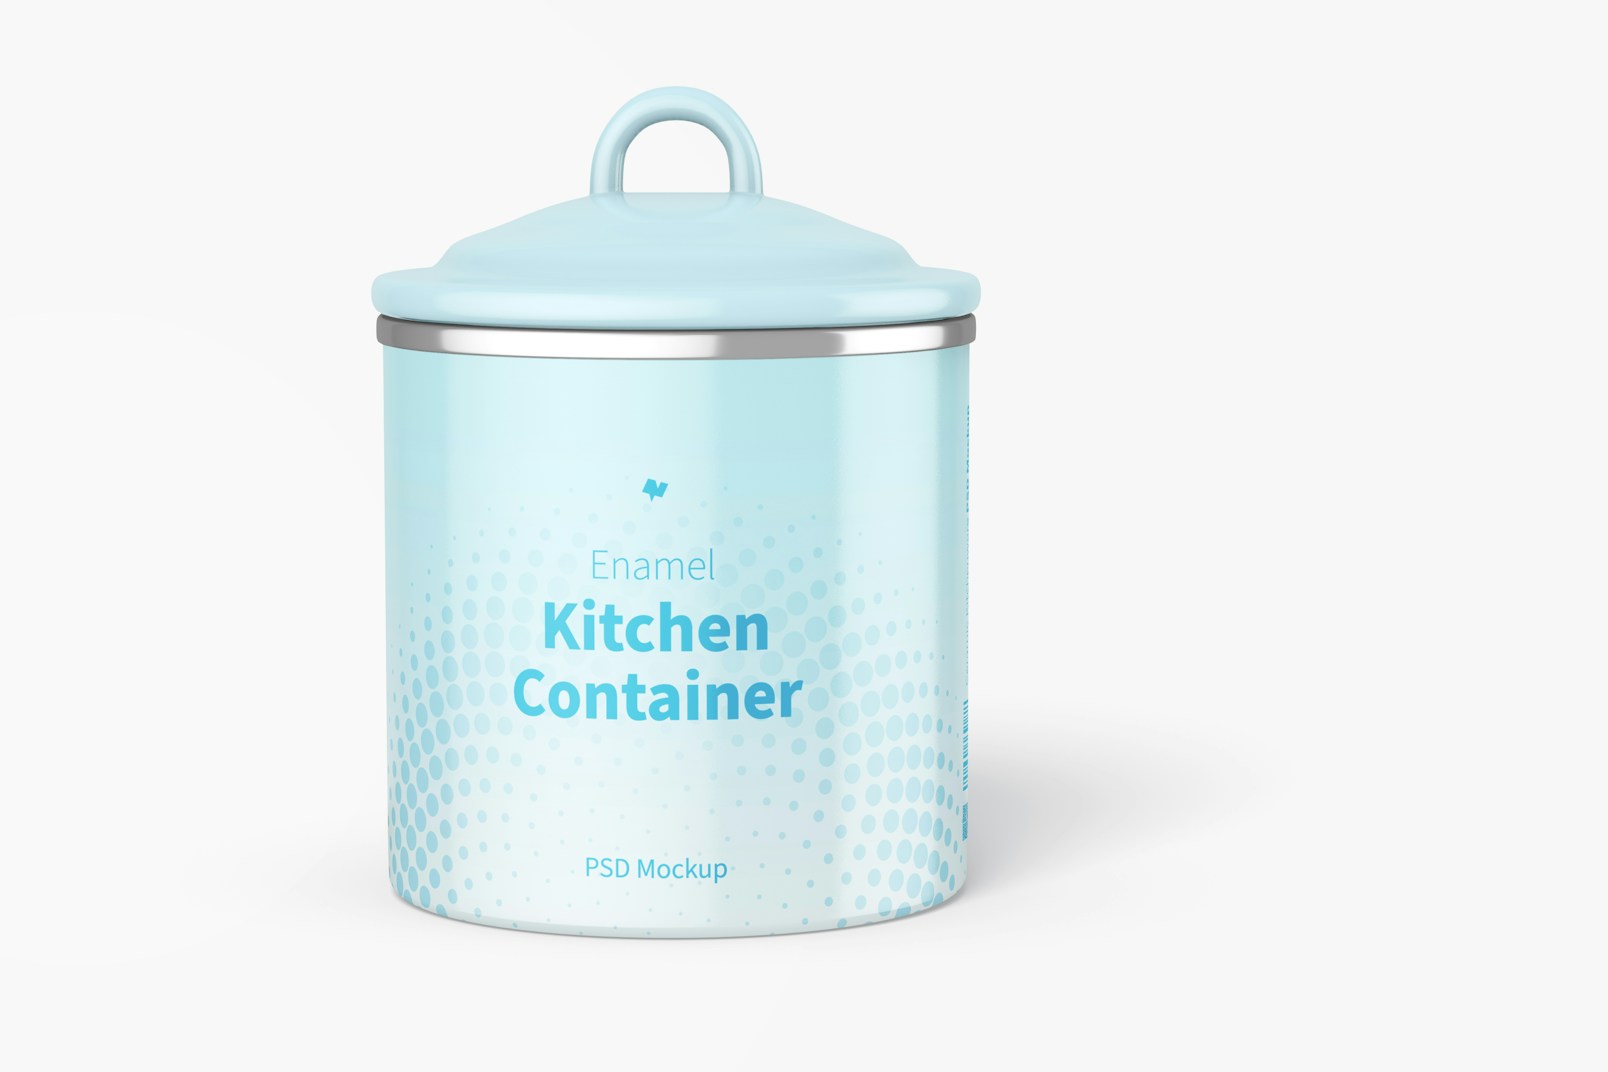 Enamel Kitchen Container Mockup, Front View